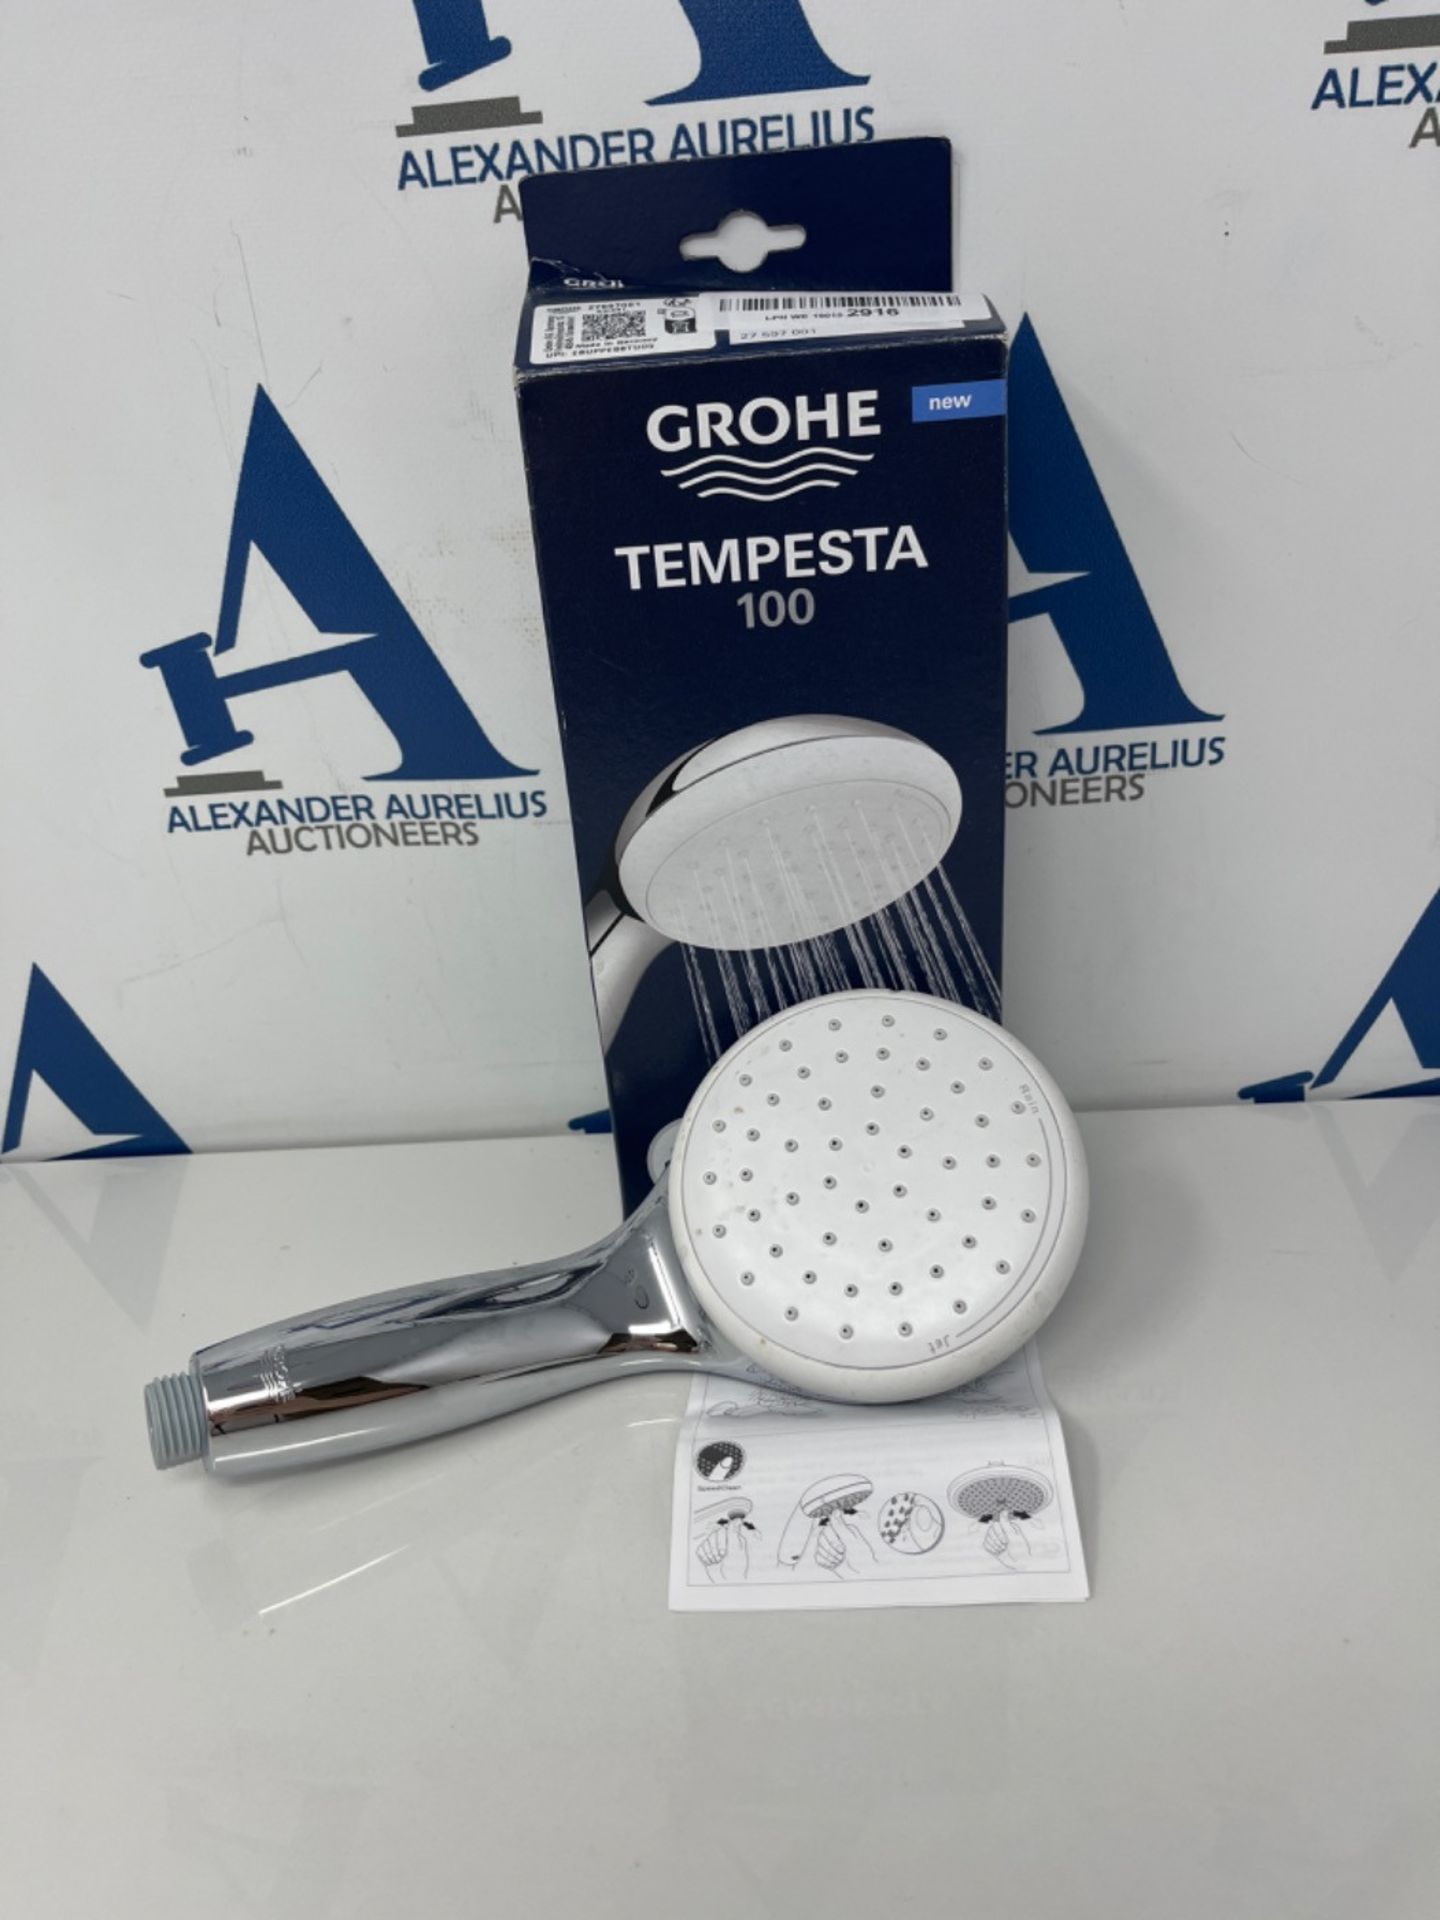 GROHE Tempesta 100 - Hand Shower (Diameter 10 cm, 2 Spray Types, Anti-Limescale System - Image 2 of 3